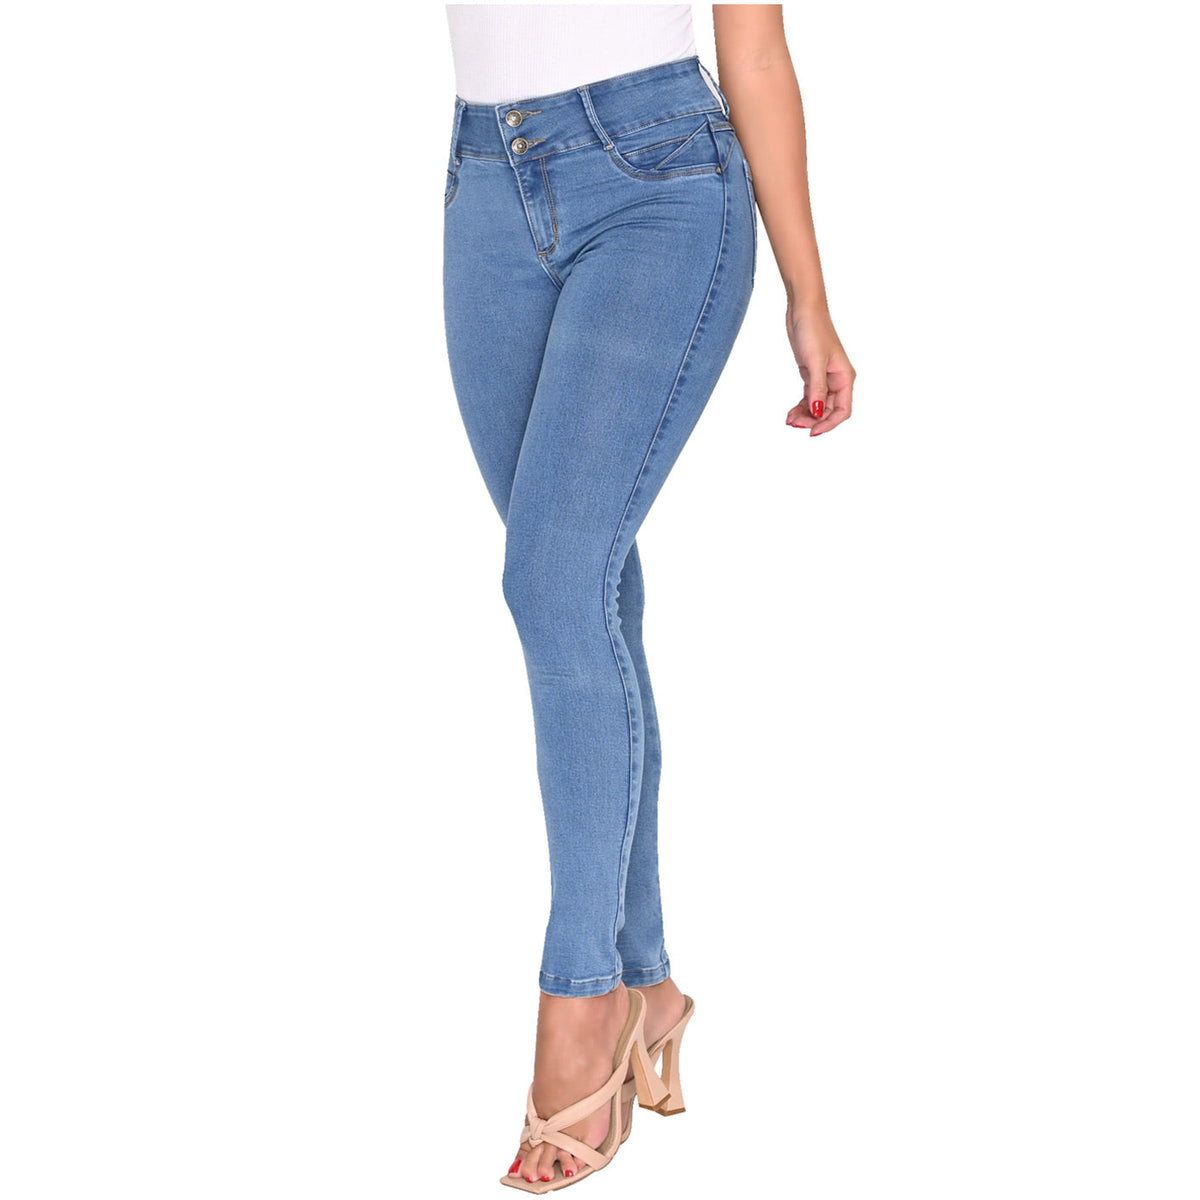 LOWLA SHAPEWEAR One piece jumpsuits for women | Butt Lifting Jeans |  Pantalones Colombianos Levanta Cola